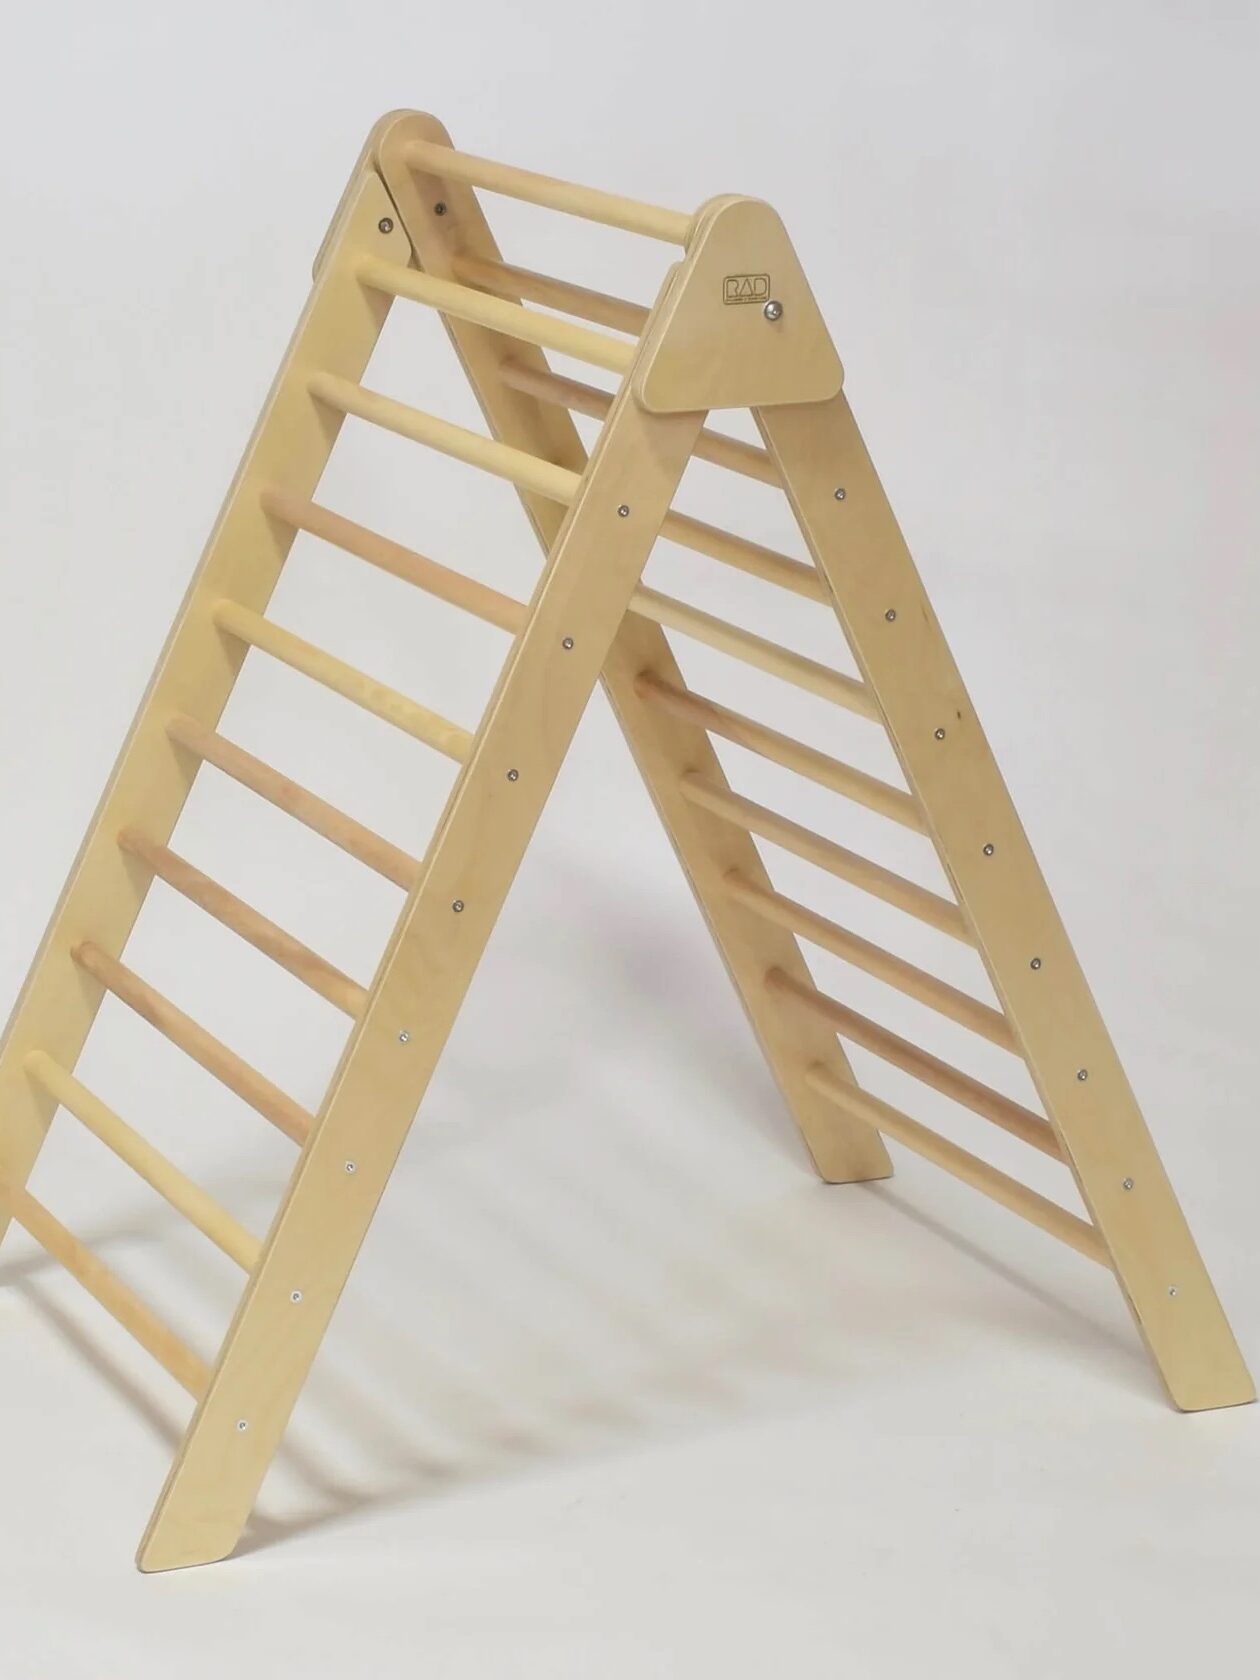 A wooden climbing triangle with rungs, designed for children's indoor play.